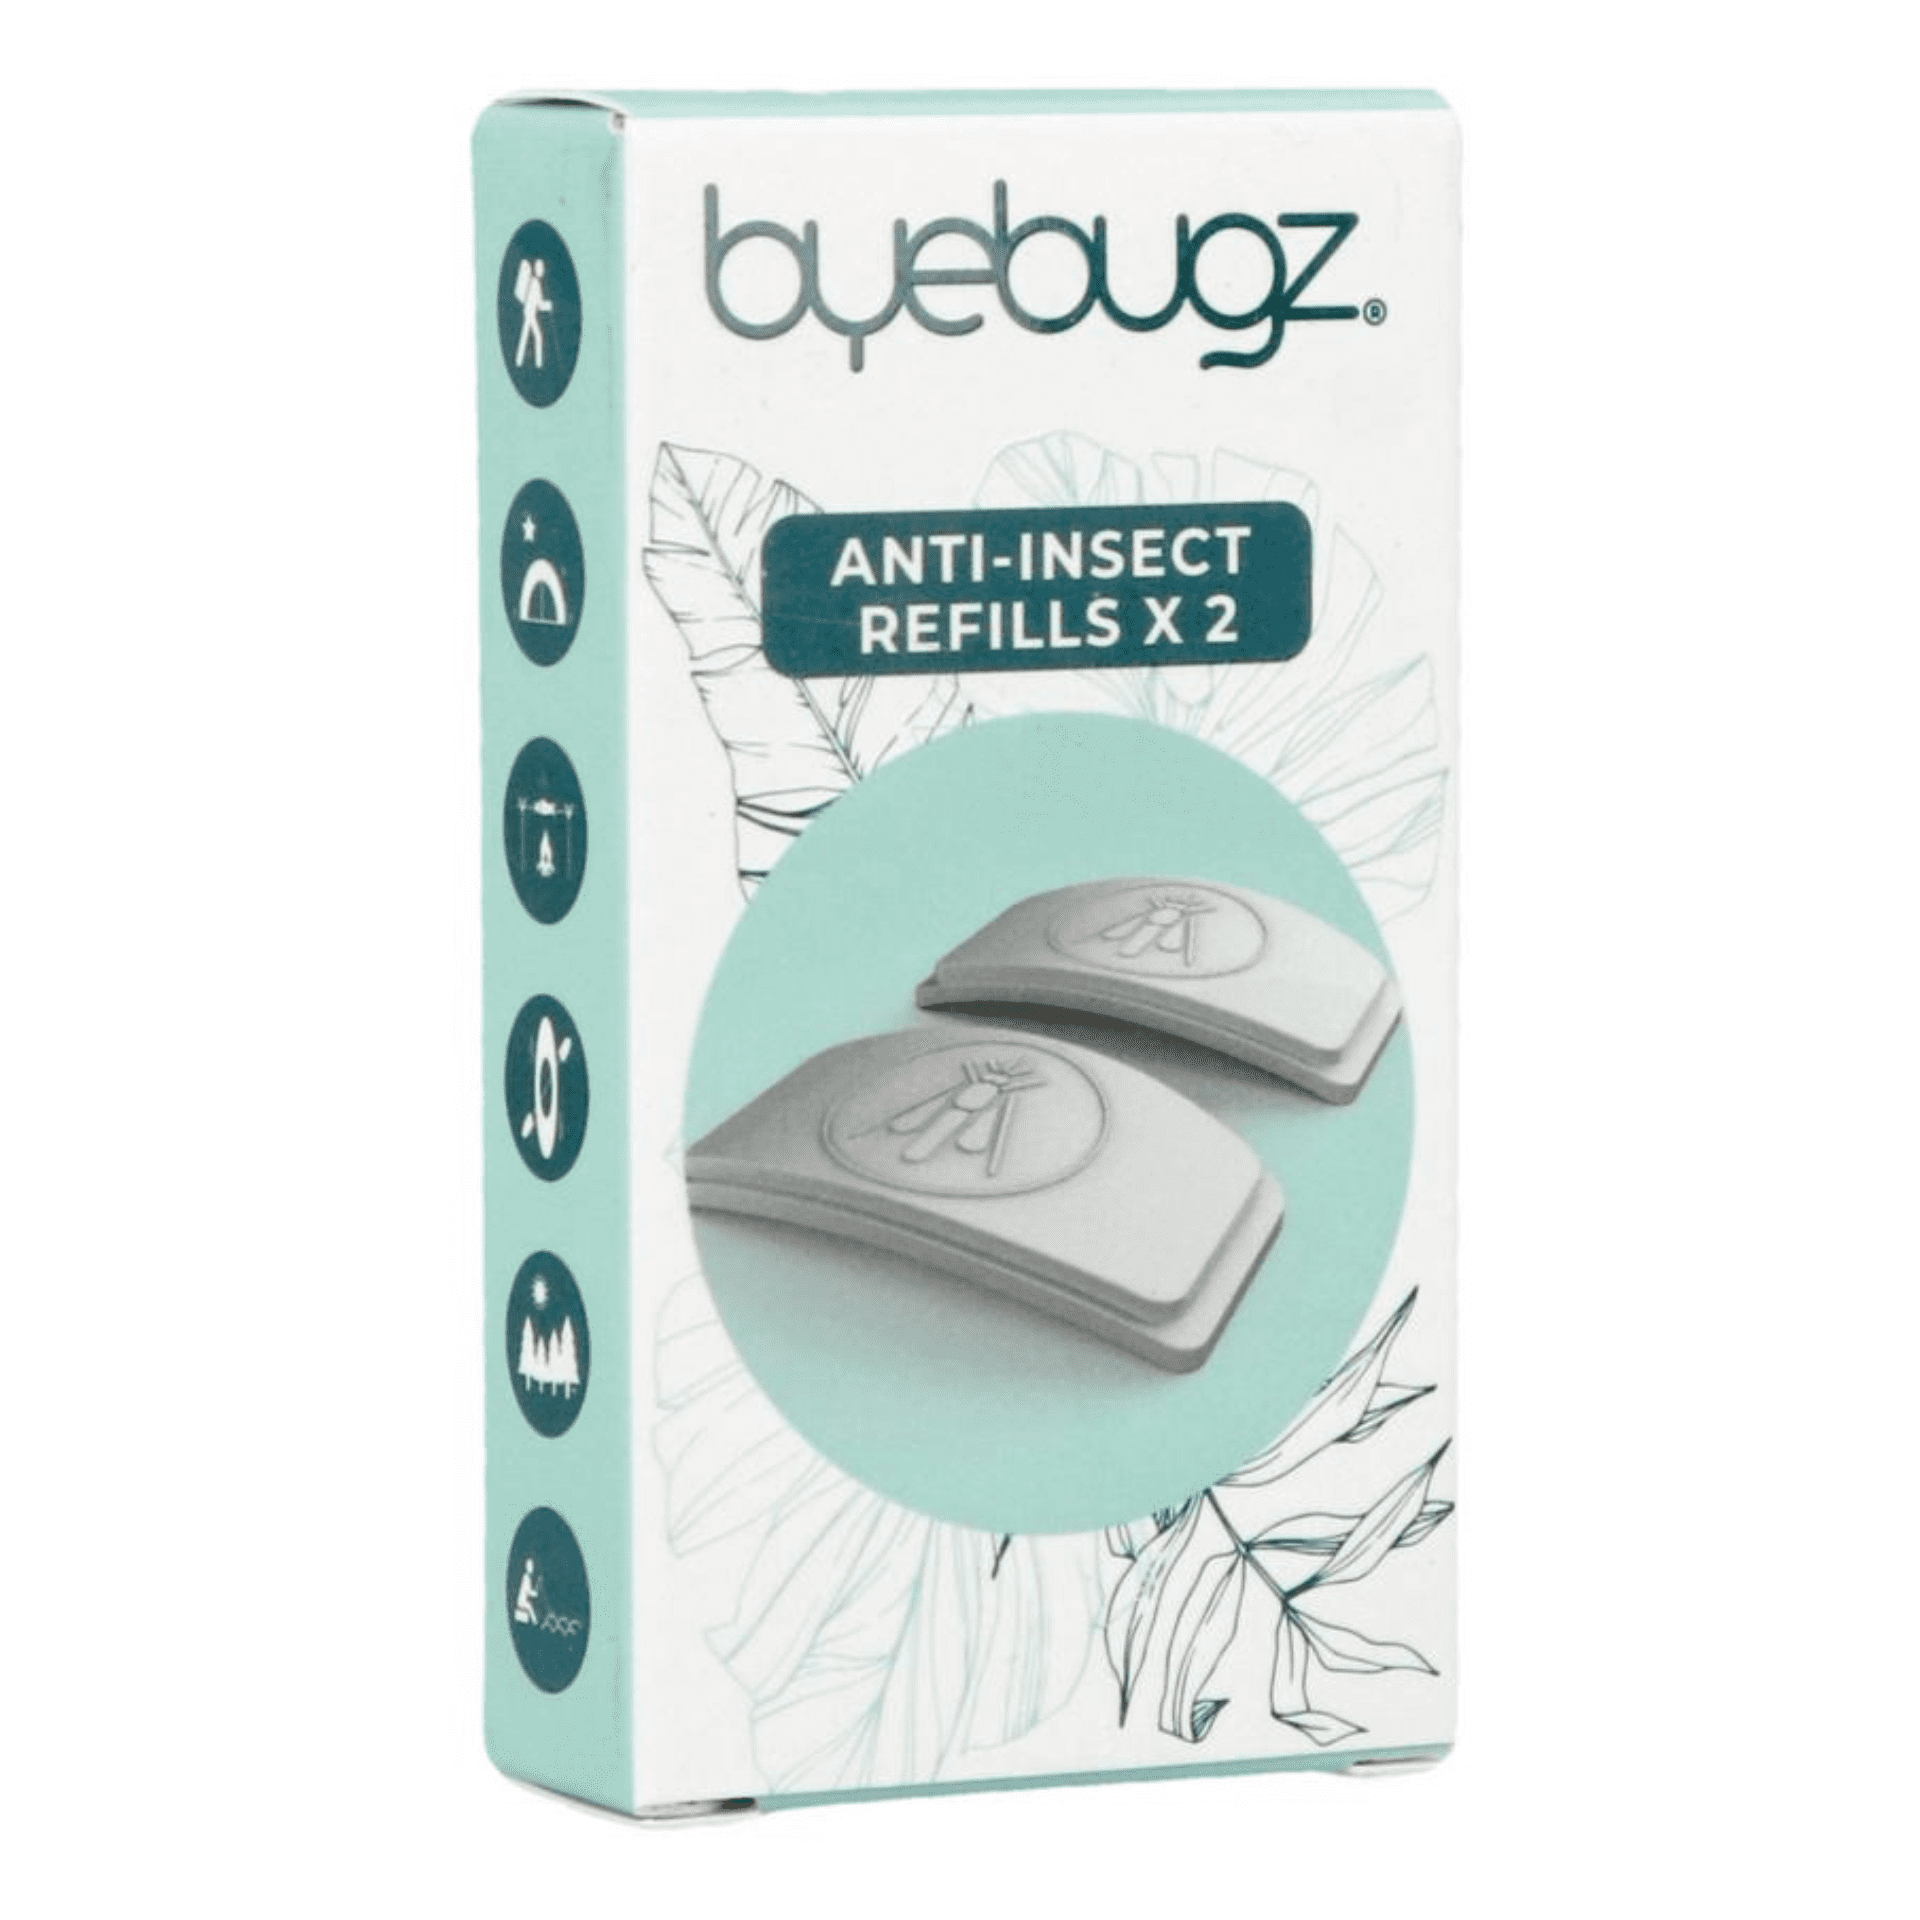 ByeBugz Duo Refill Pack